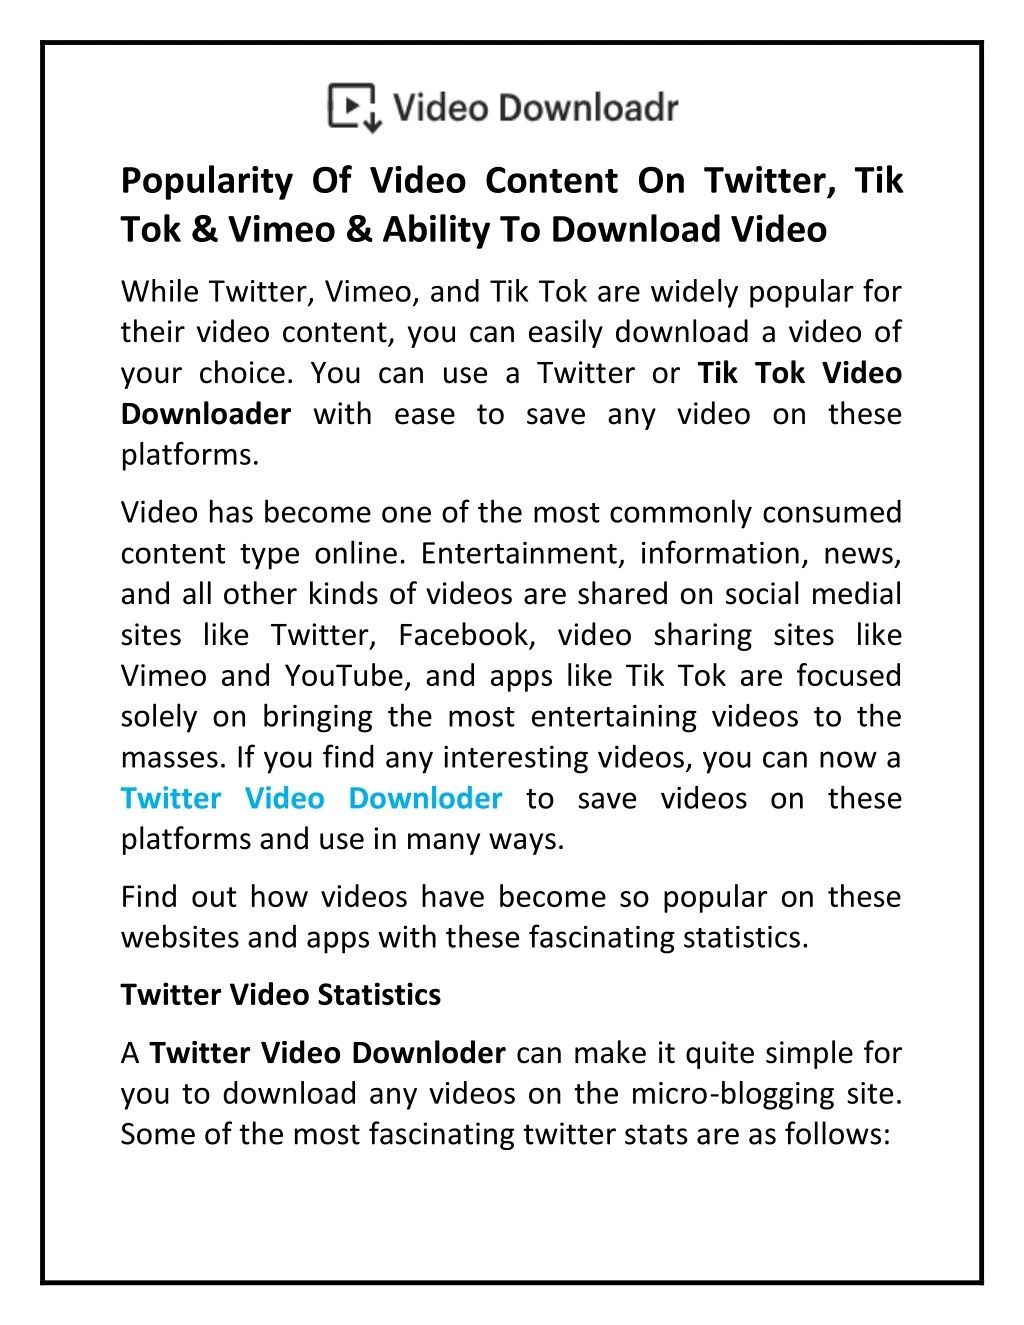 popularity of video content on twitter